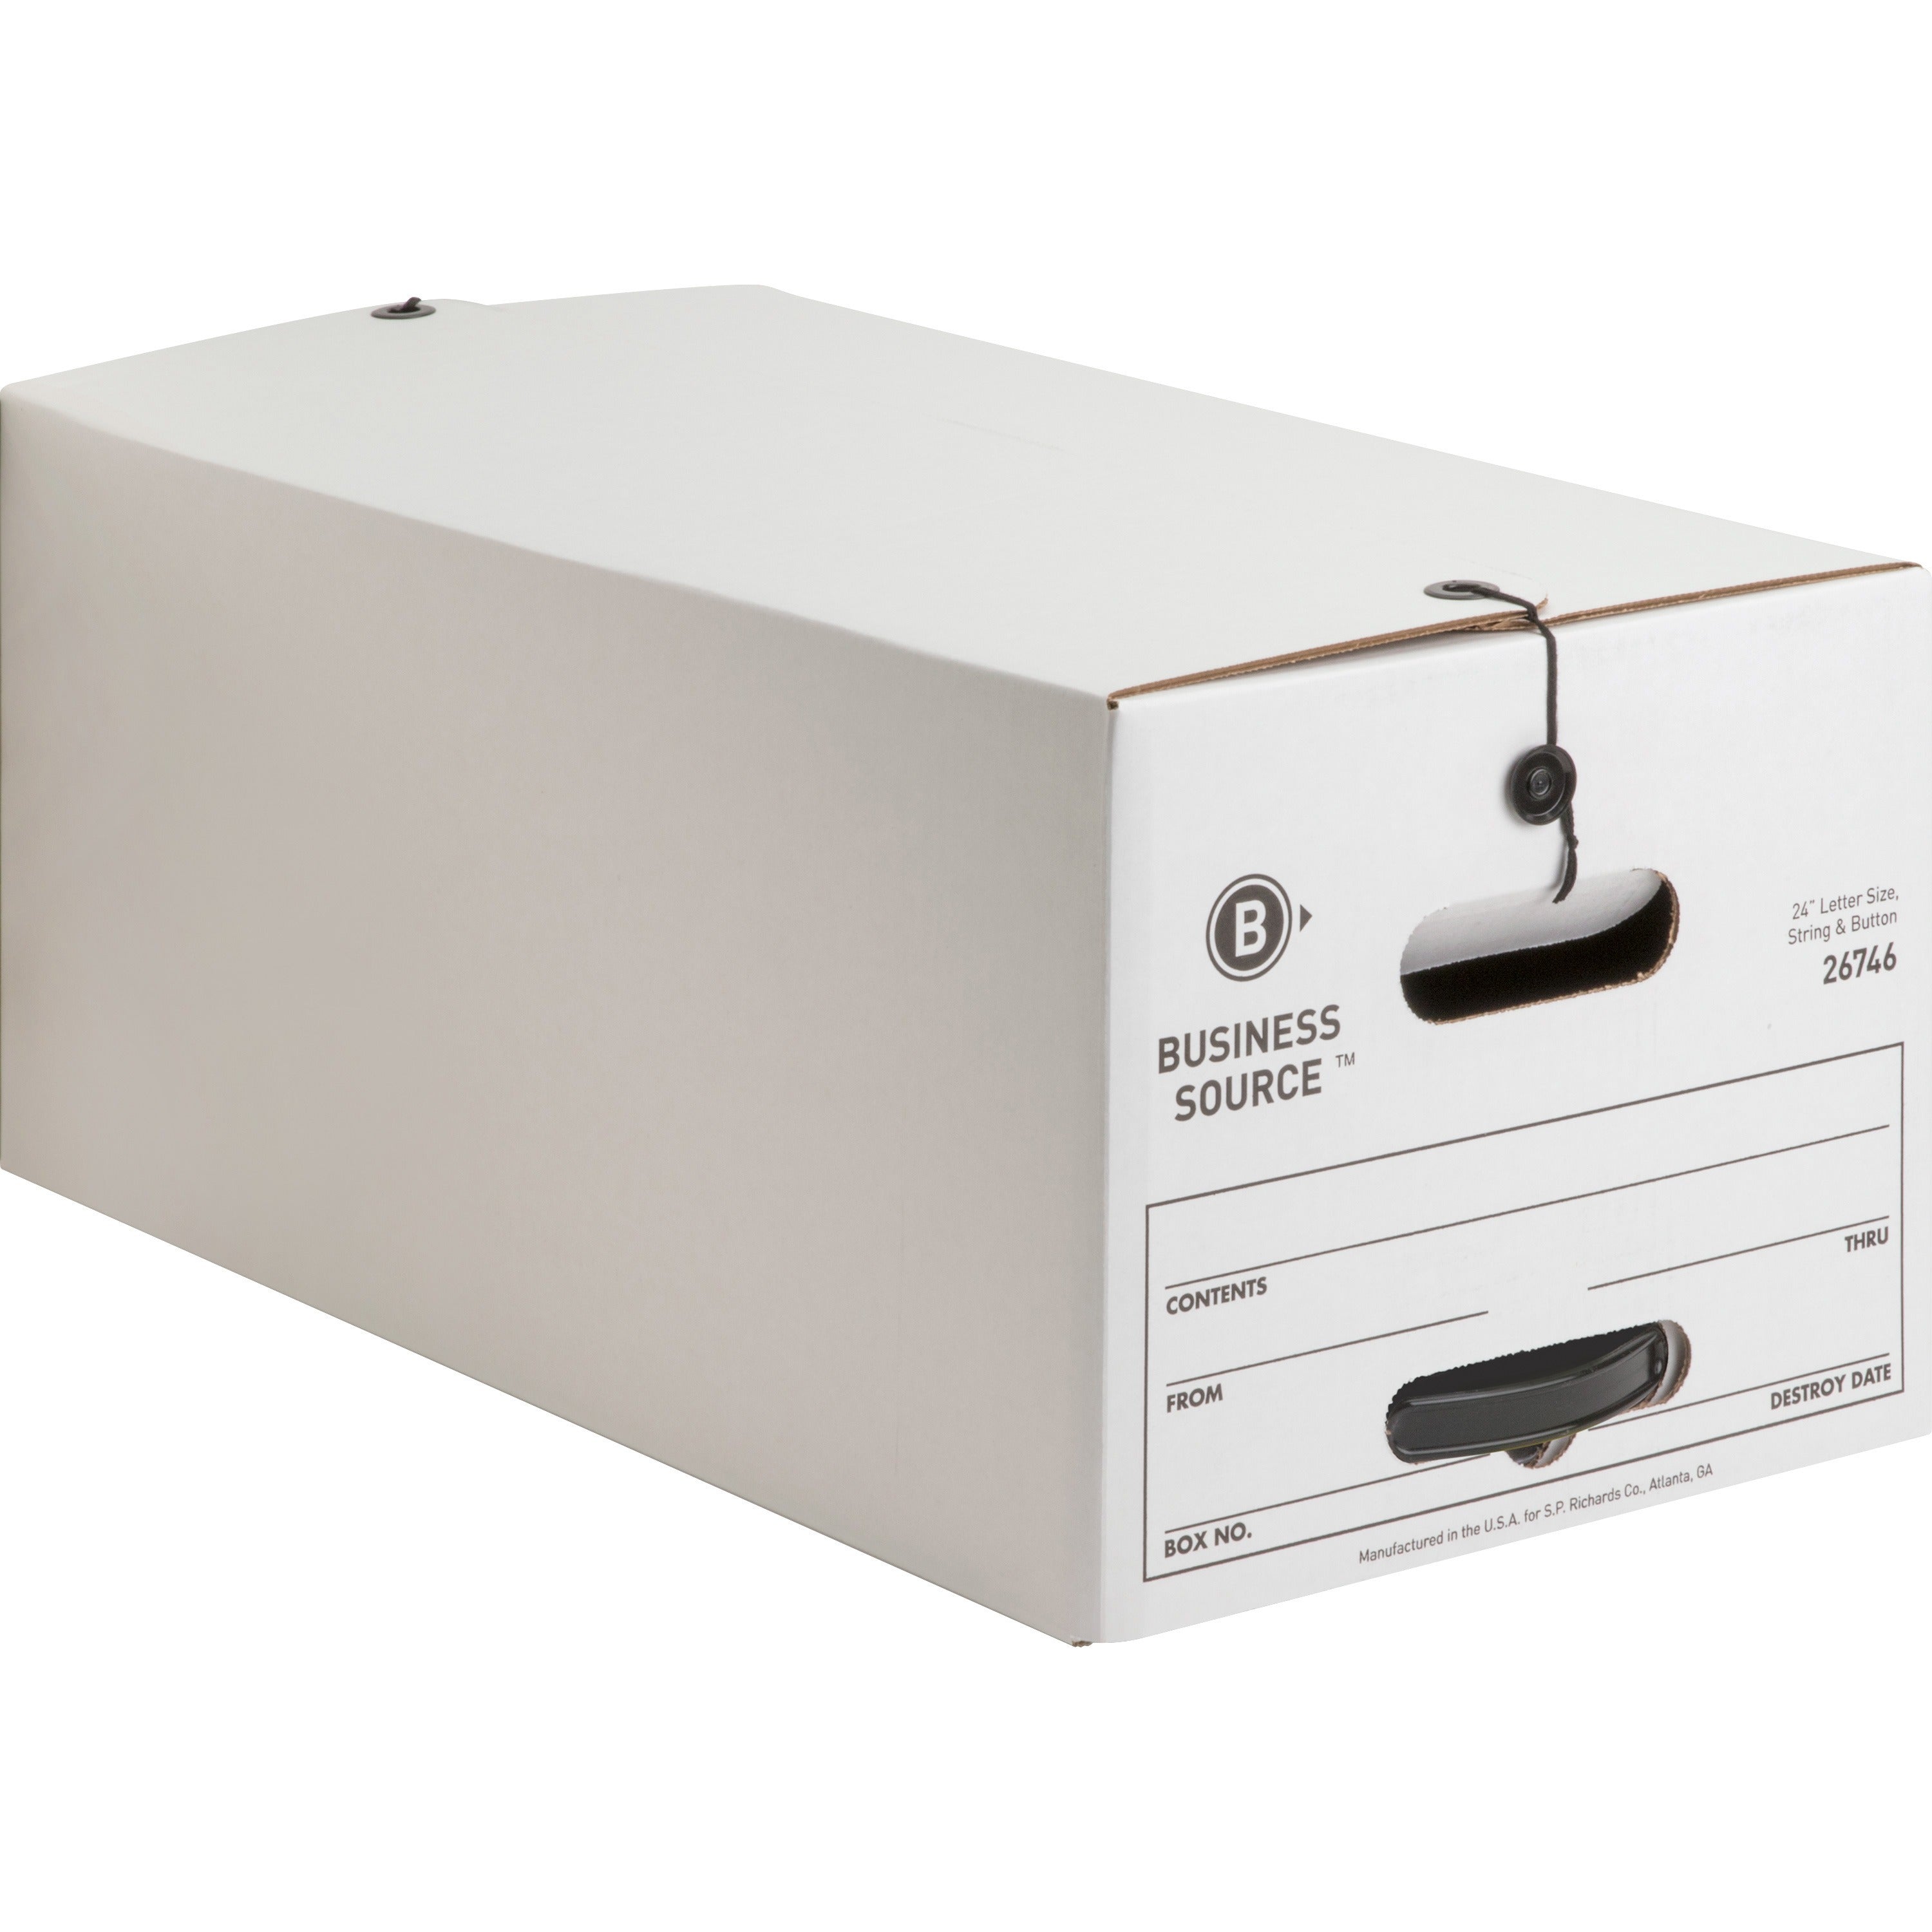 business-source-medium-duty-letter-size-storage-box-internal-dimensions-12-width-x-24-depth-x-10-height-external-dimensions-123-width-x-241-depth-x-108-height-media-size-supported-letter-stackable-white-recycled-12-carton_bsn26746 - 1